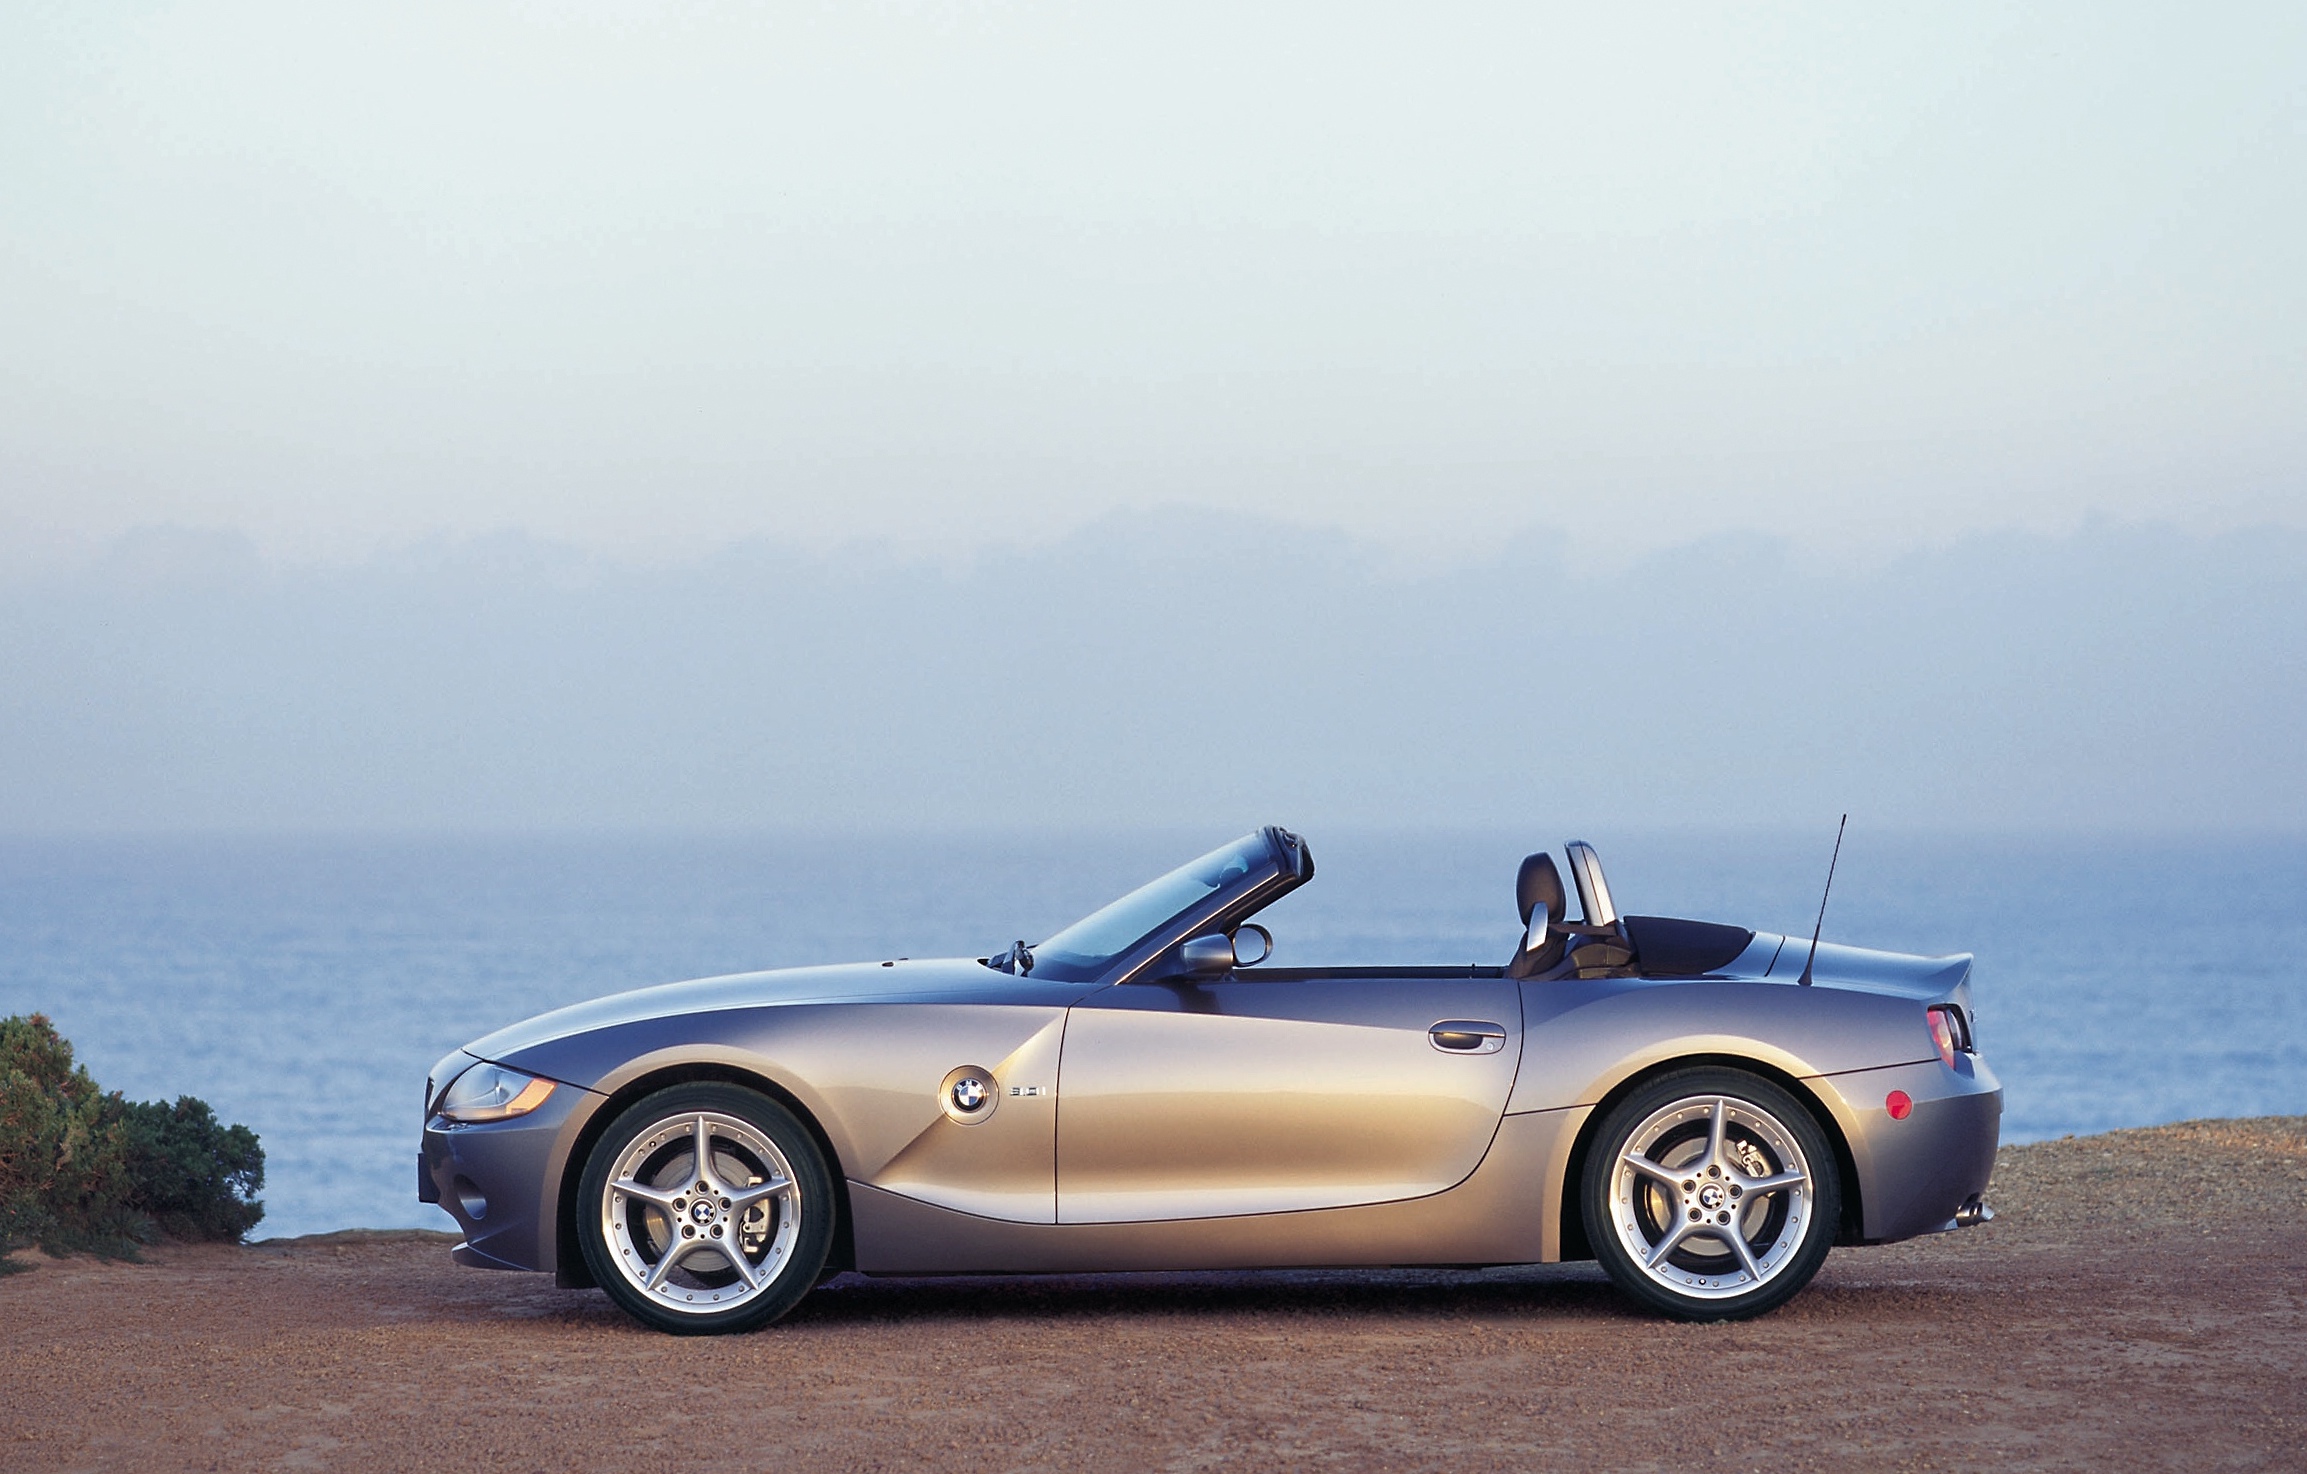 The Z4's design makes it hard to miss